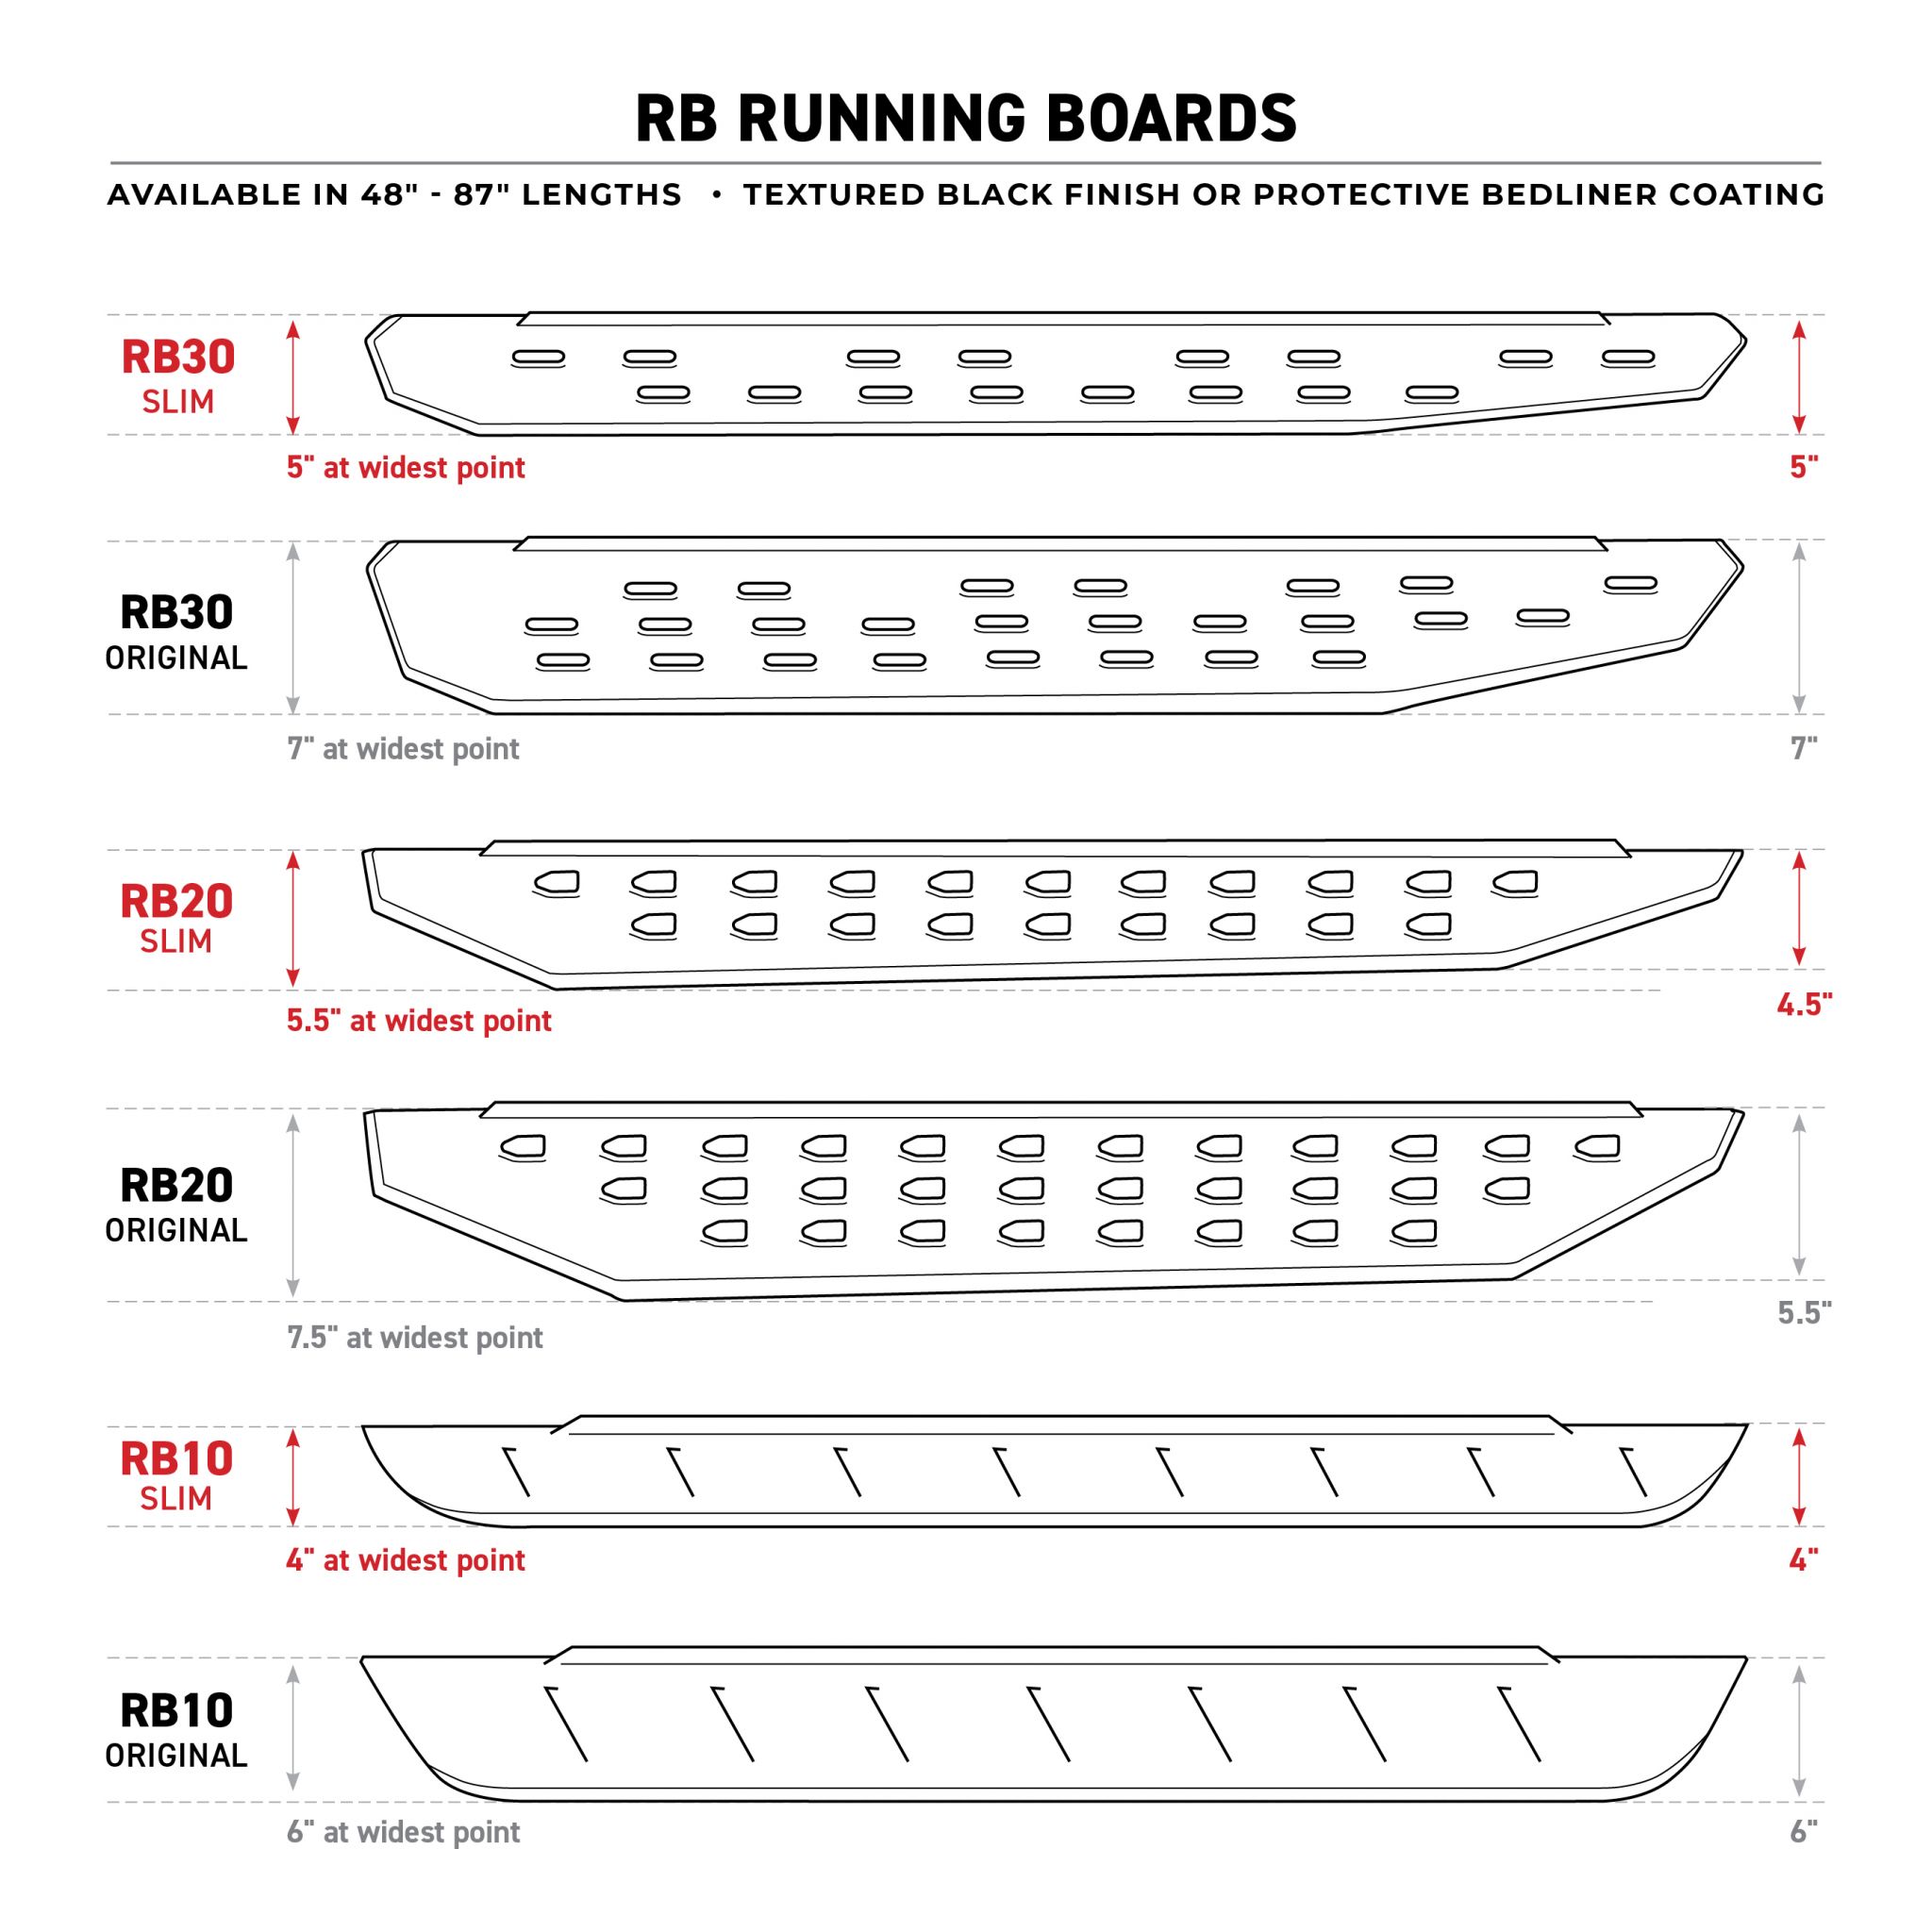 Go Rhino 63443973T - RB10 Running boards - Complete Kit: RB10 Running board + Brackets - Protective Bedliner coating